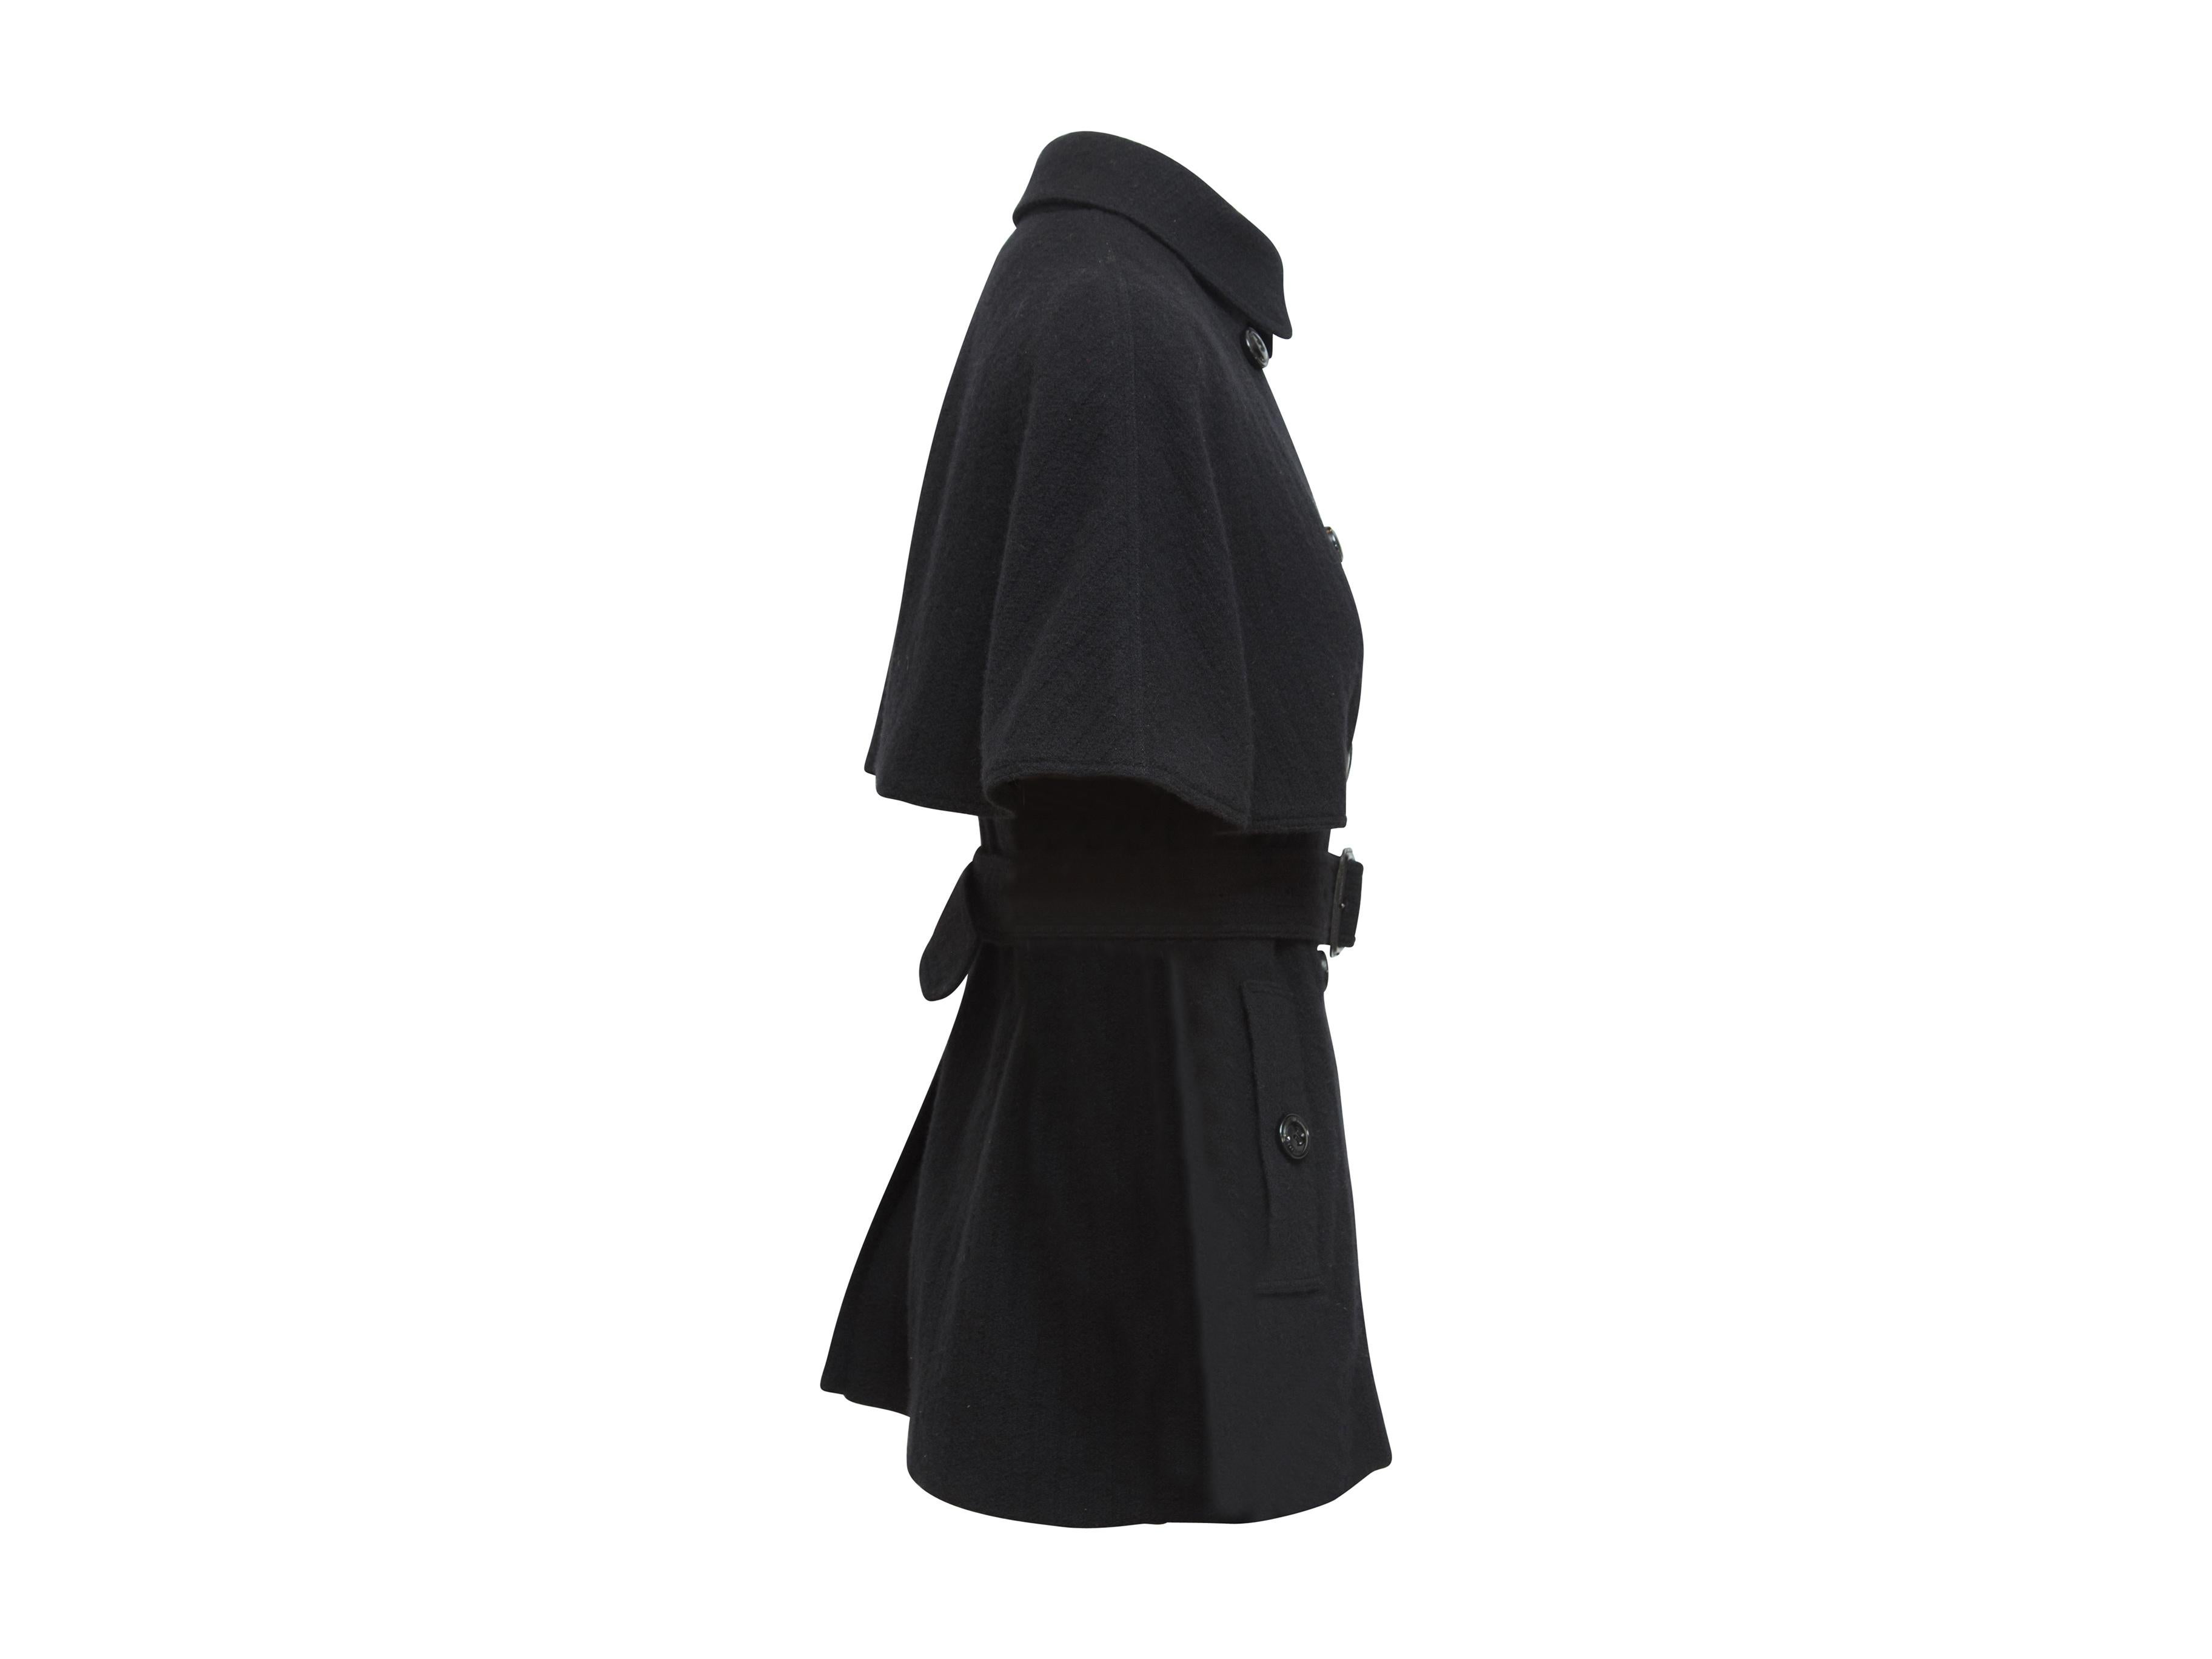 Product details:  Black coat with cape by Burberry London.  Rounded point collar.  Double-breasted button-front closure.  Adjustable belted waist.  Waist button slide pockets.  Cape secured by back button.  Center back hem vent.  30